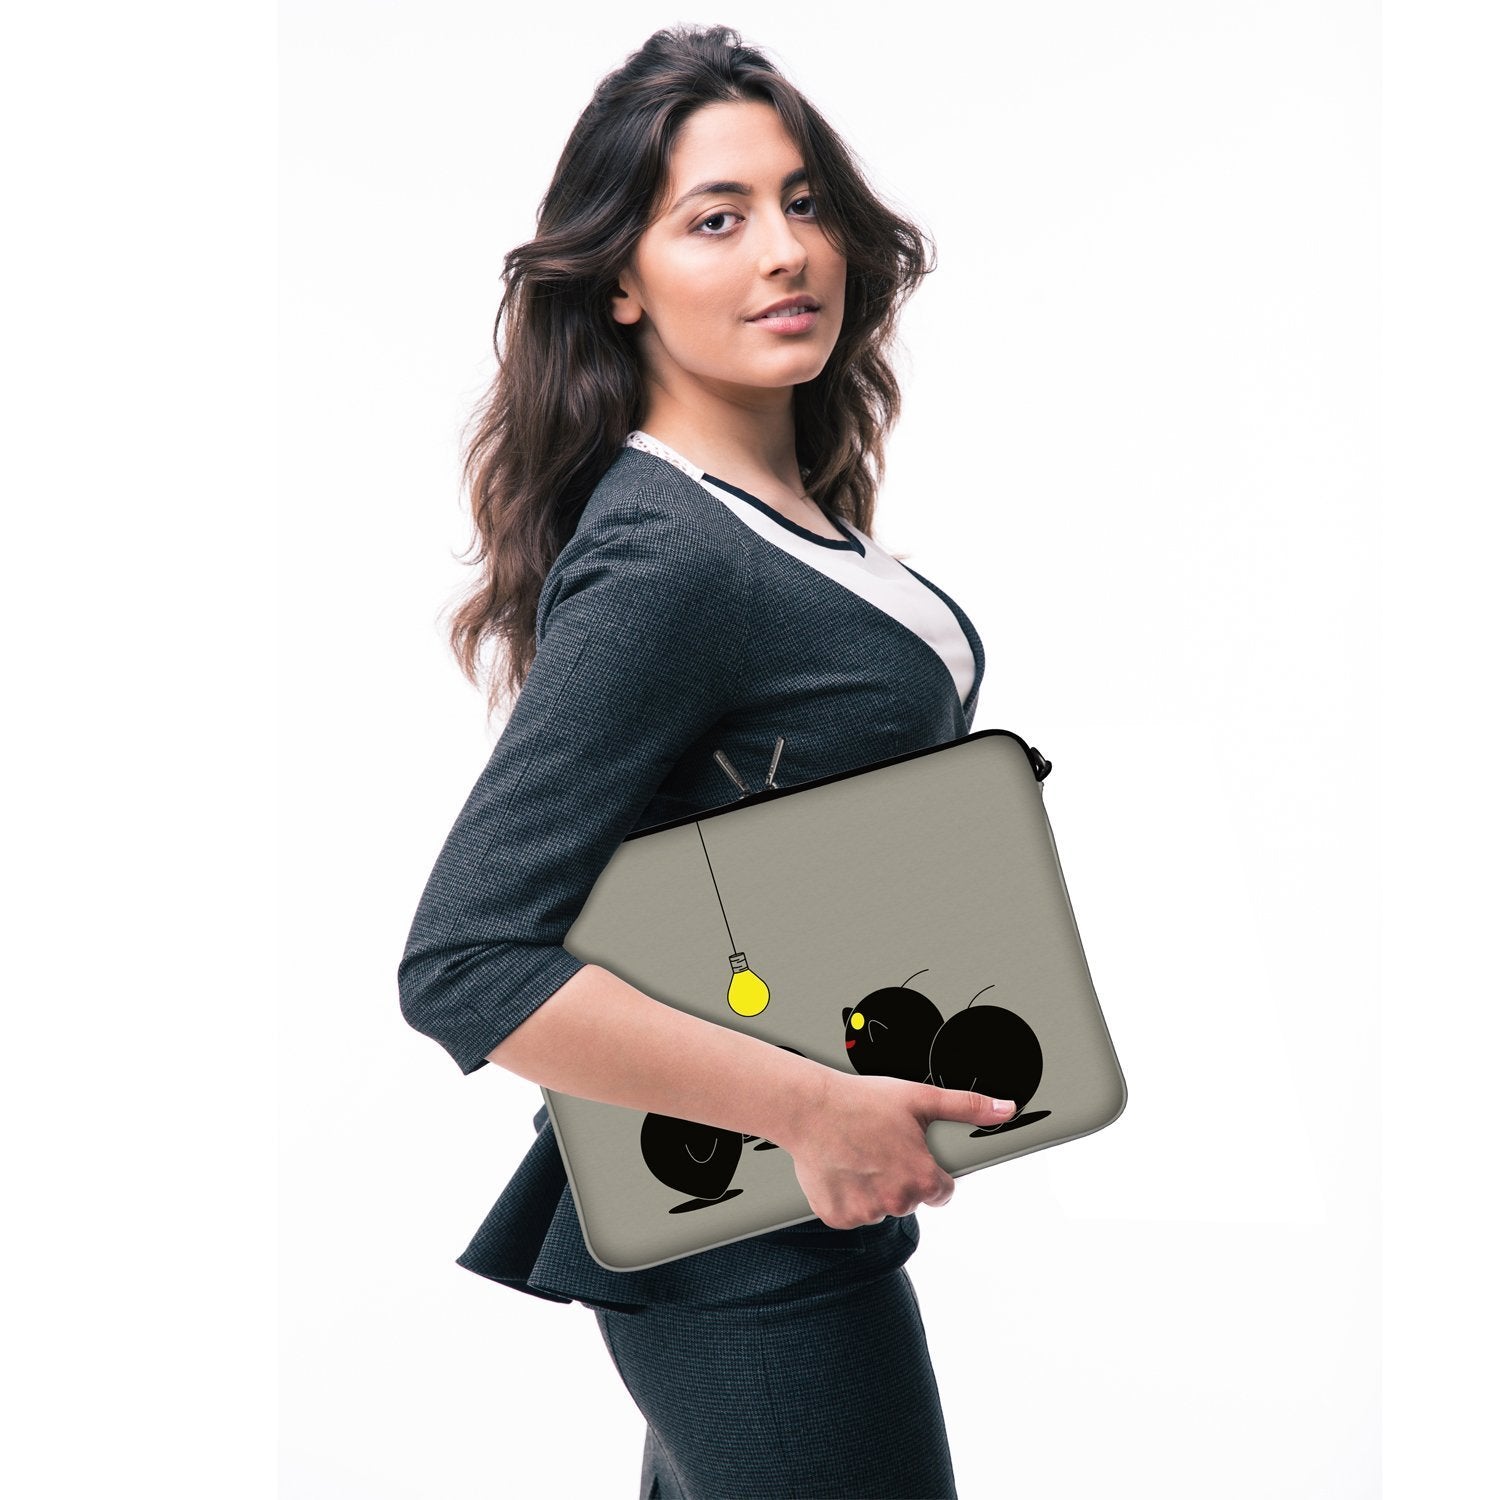 17"- 17.3" (inch) LAPTOP SLEEVE CARRY CASE/BAG NEOPRENE FOR LAPTOPS/NOTEBOOKS, ZIPPED *Smiley Faces*